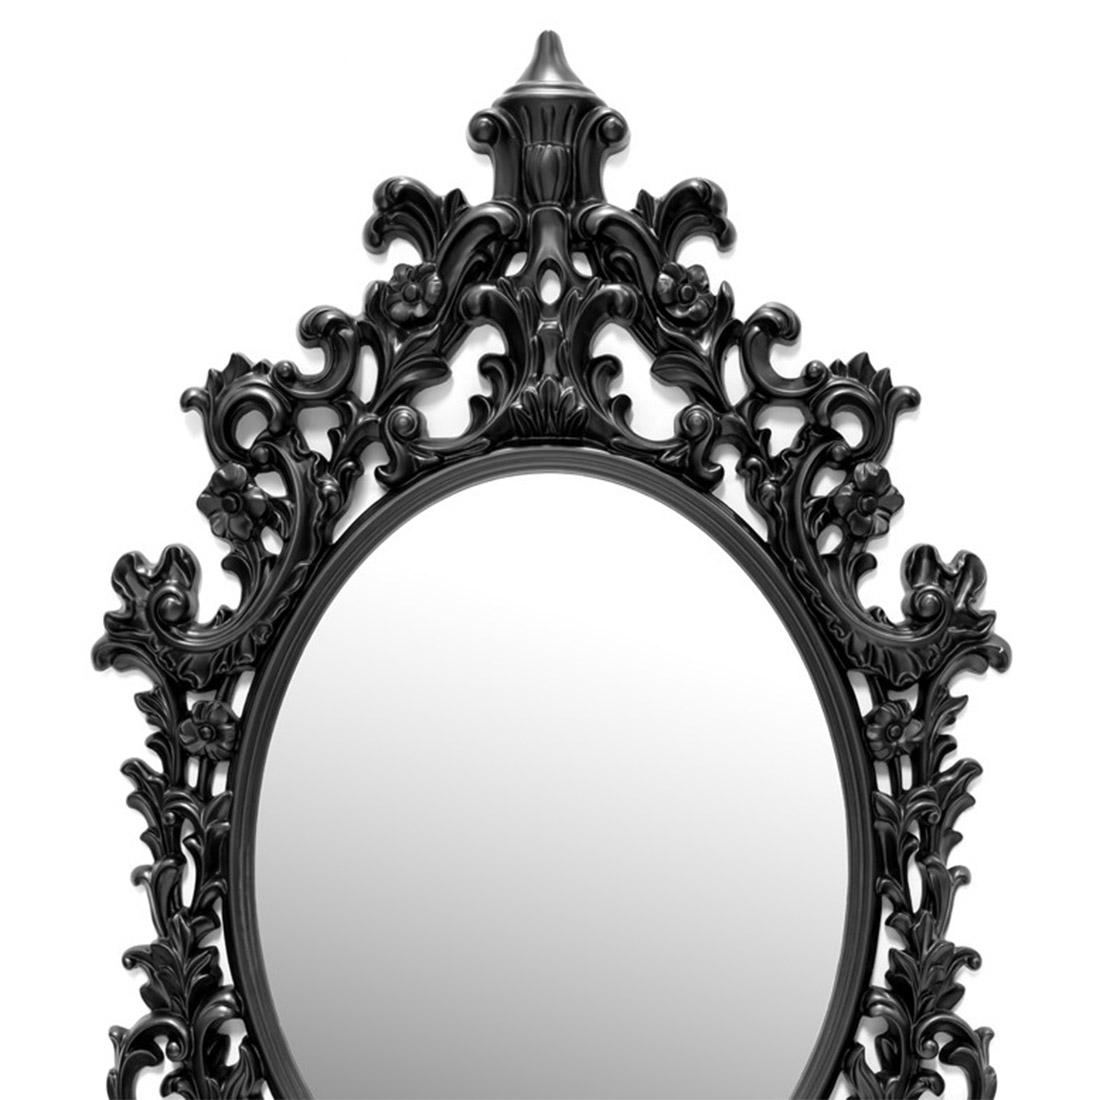 Mirror Salerne black with high quality
resin frame in black finish and with oval
mirror glass.